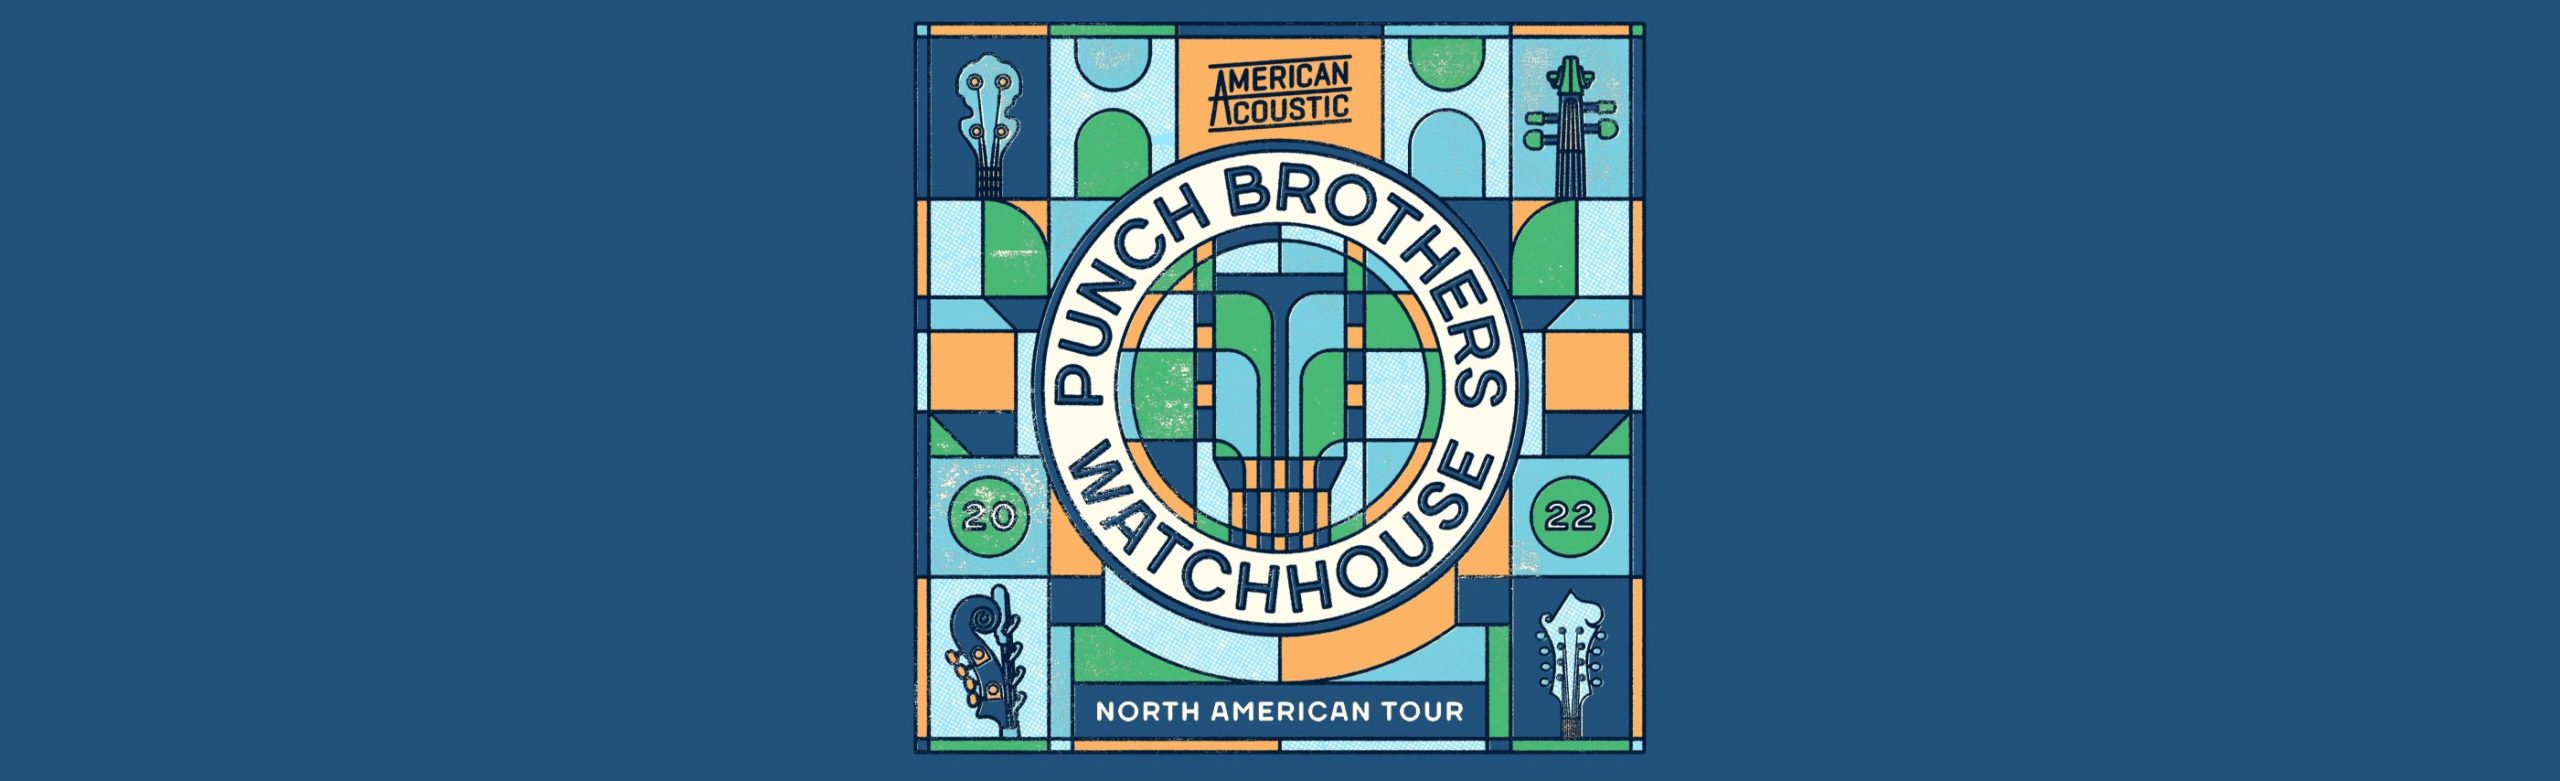 Punch Brothers + Watchhouse Giveaway KettleHouse Amphitheater 2022 Image